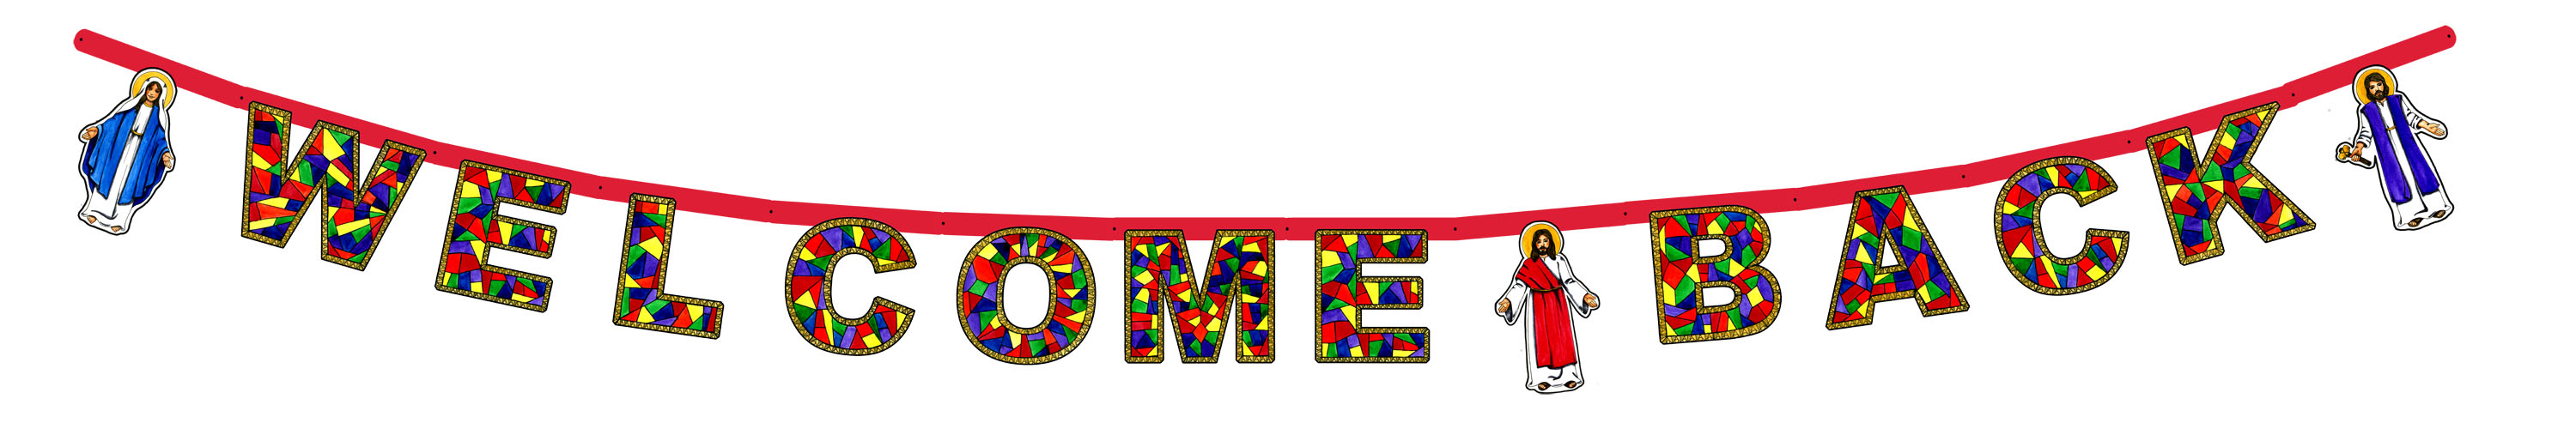 Free Welcome Back Clipart Pictures.